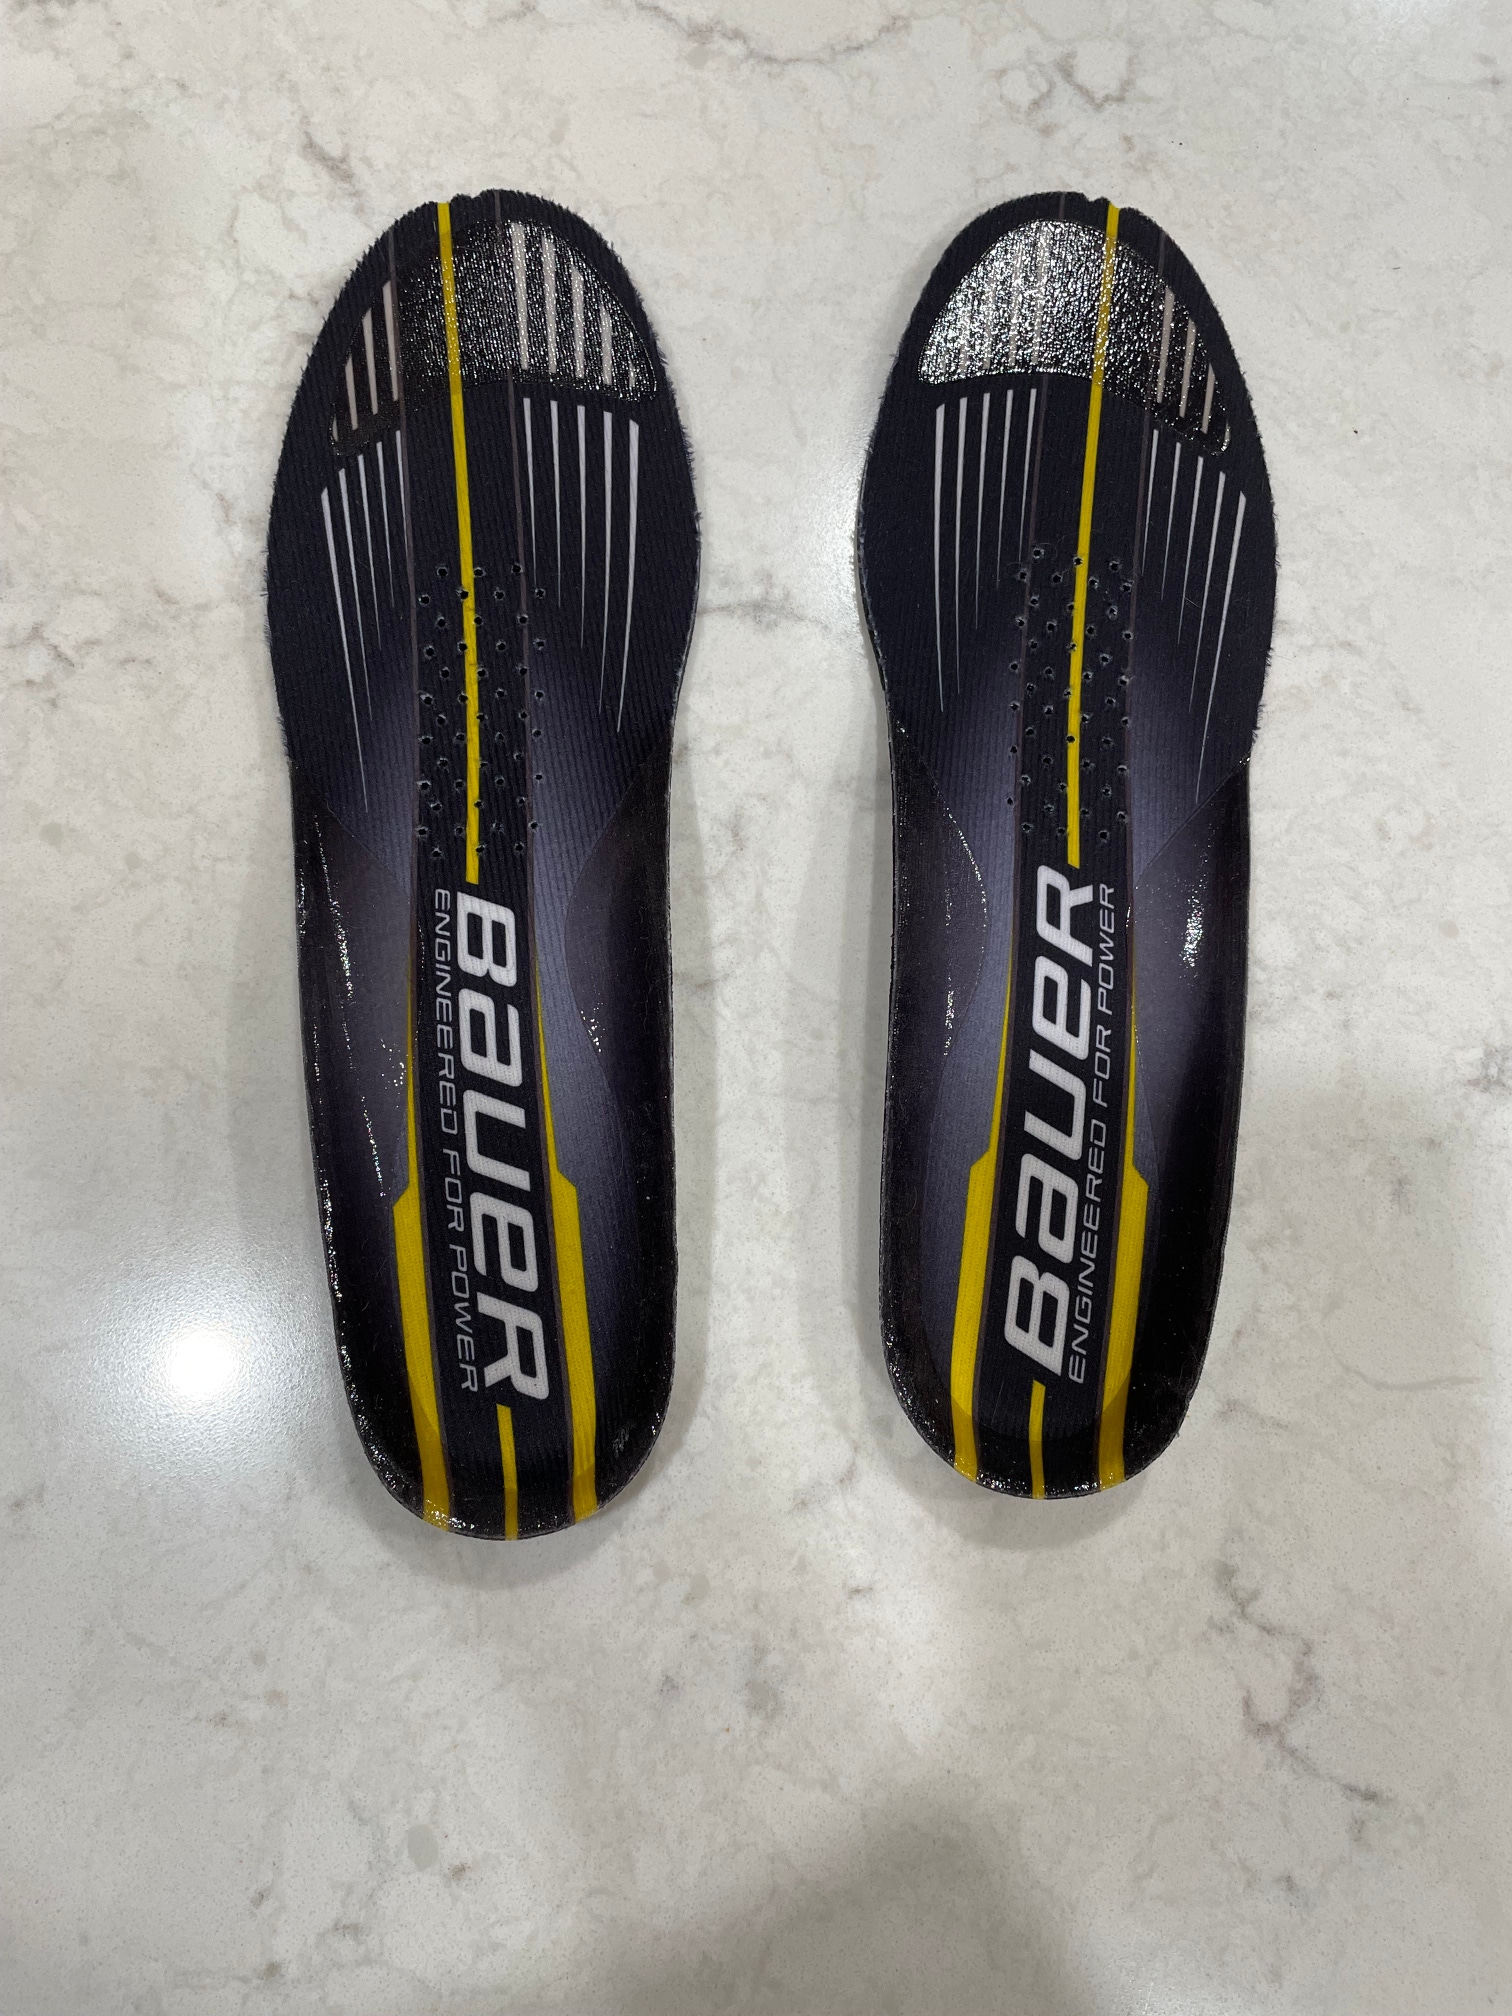 New Bauer footbeds insoles size 6